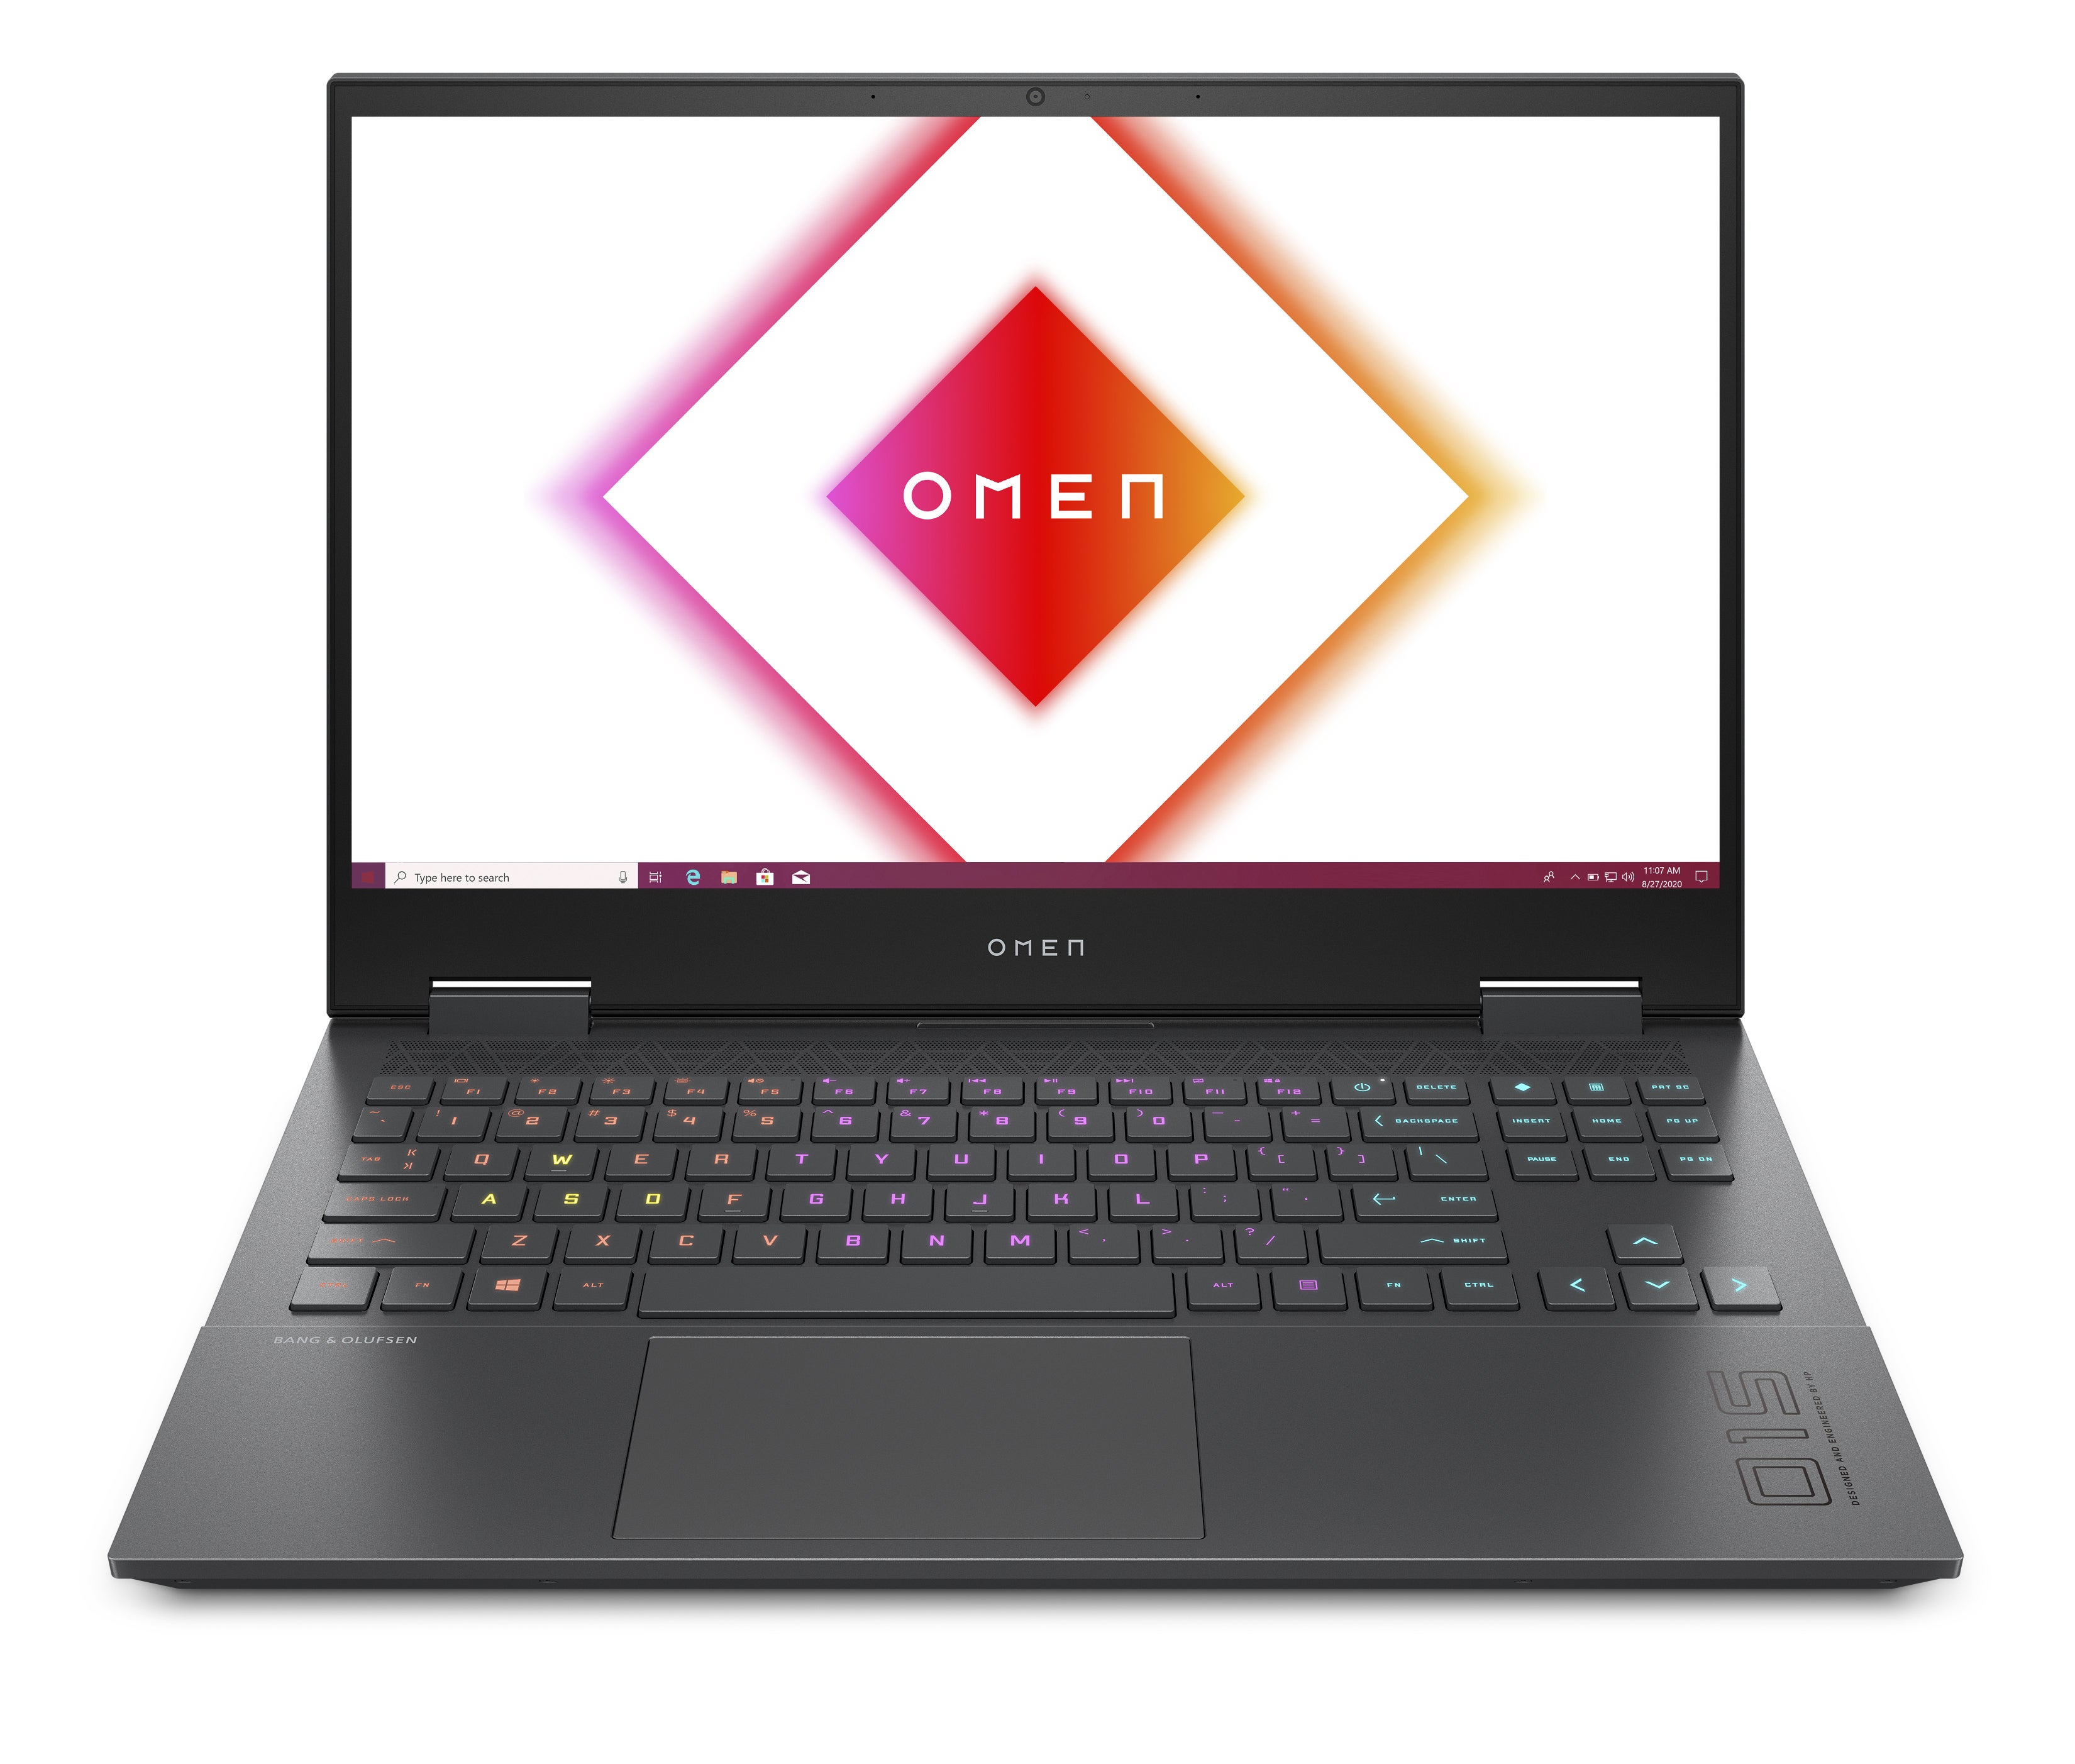 The HP Omen gaming laptop offers AMD and Intel flavors for 1,000 and up